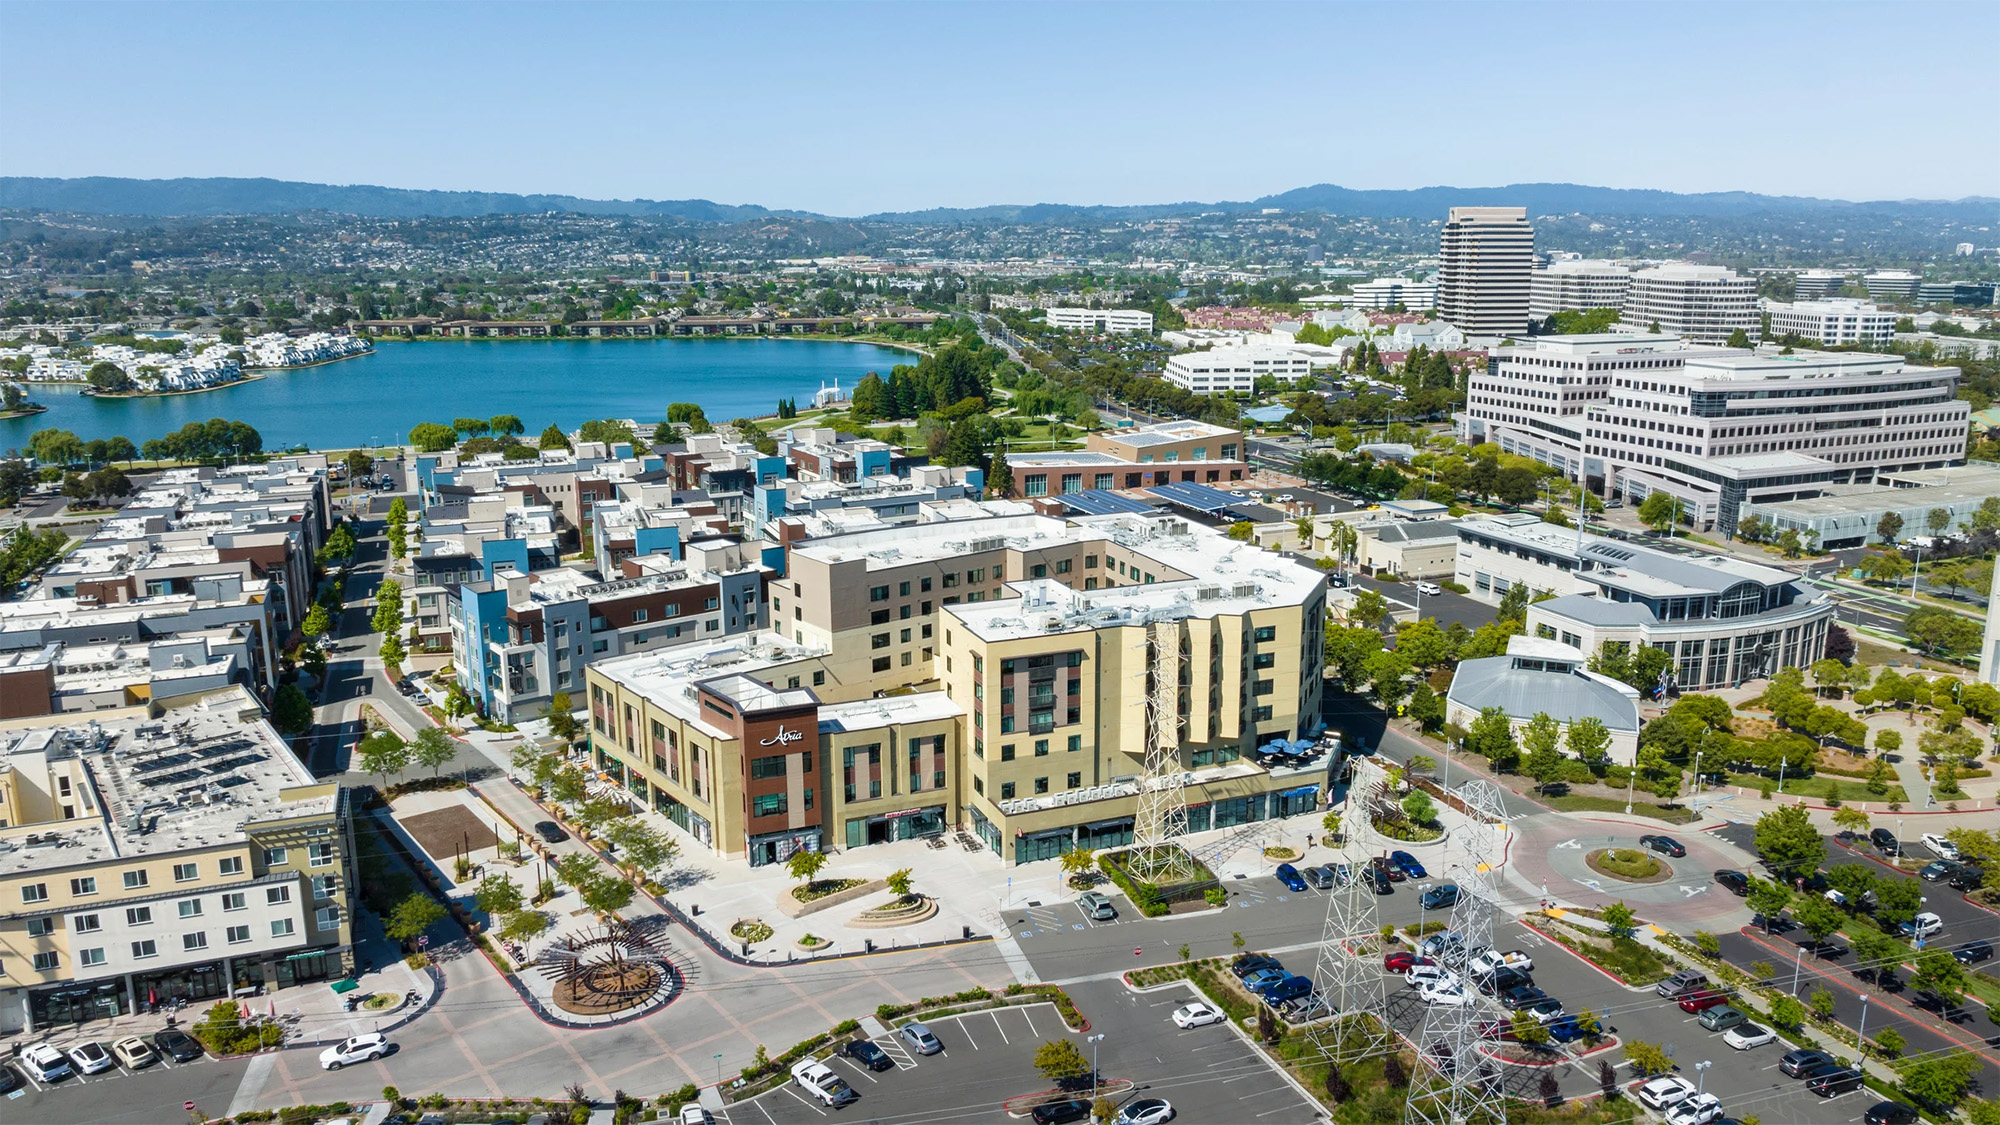 The Atria senior living development lies at the center of Foster City, CA, where residents can walk to almost any service or attraction. 